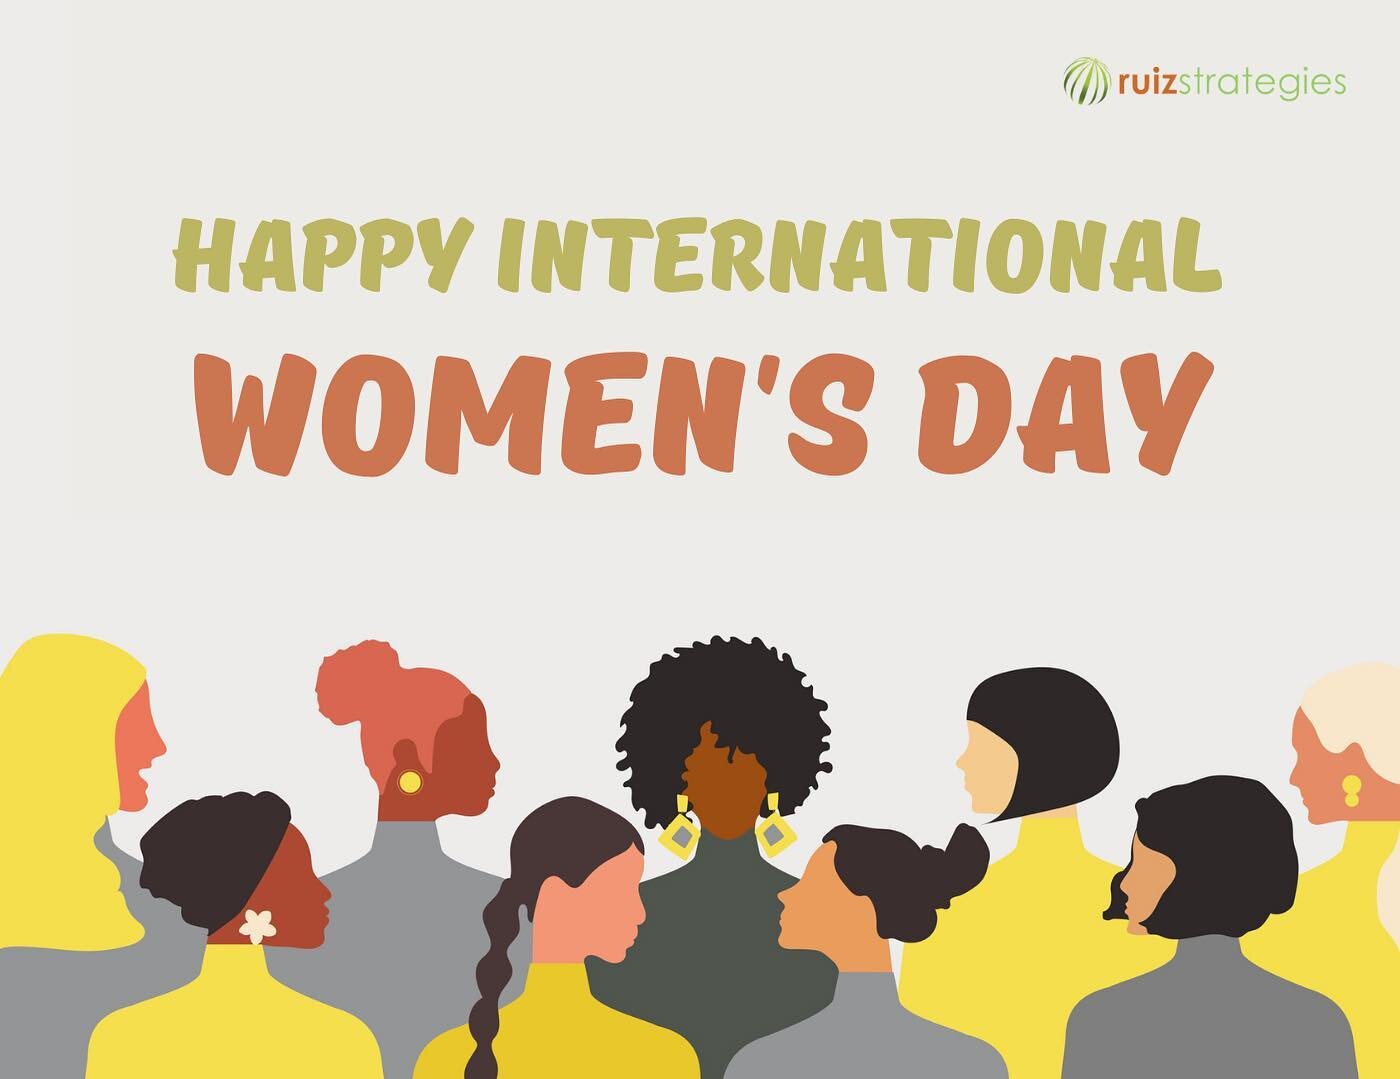 Today is #InternationalWomensDay and we're here to celebrate! Thank you to all the amazing women who have paved the way, and continue to pave the way for all women! #IWD2022 #IWD #WomensHistoryMonth #BreakTheBias